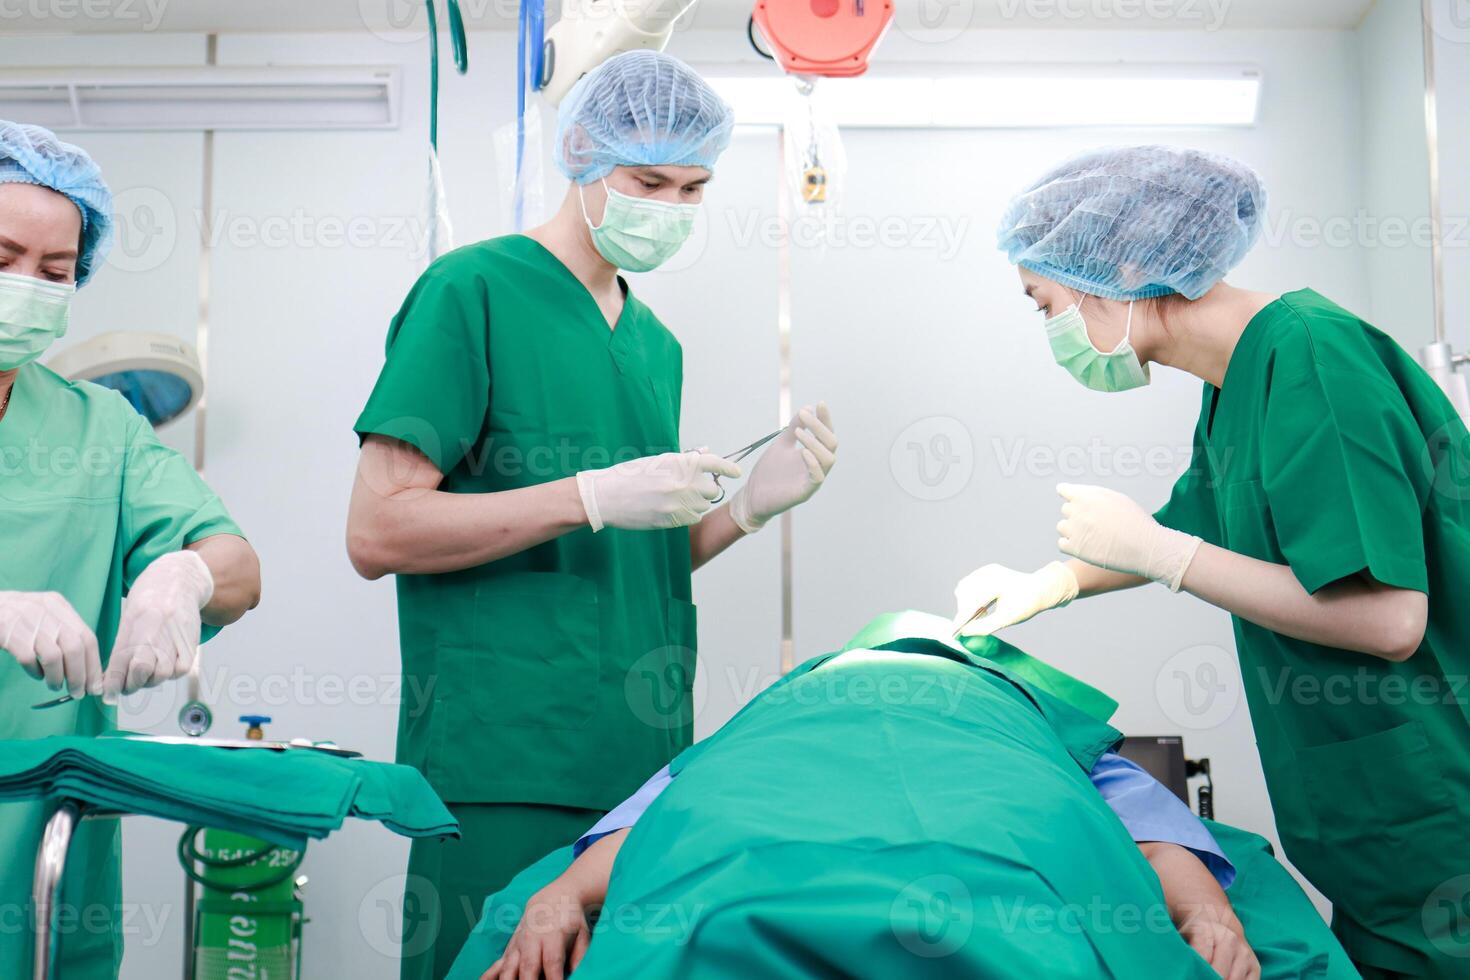 Professional team of Asian surgeons Perform surgery on a patient lying on a bed in a hospital operating room. Medical concepts. emergency surgery photo